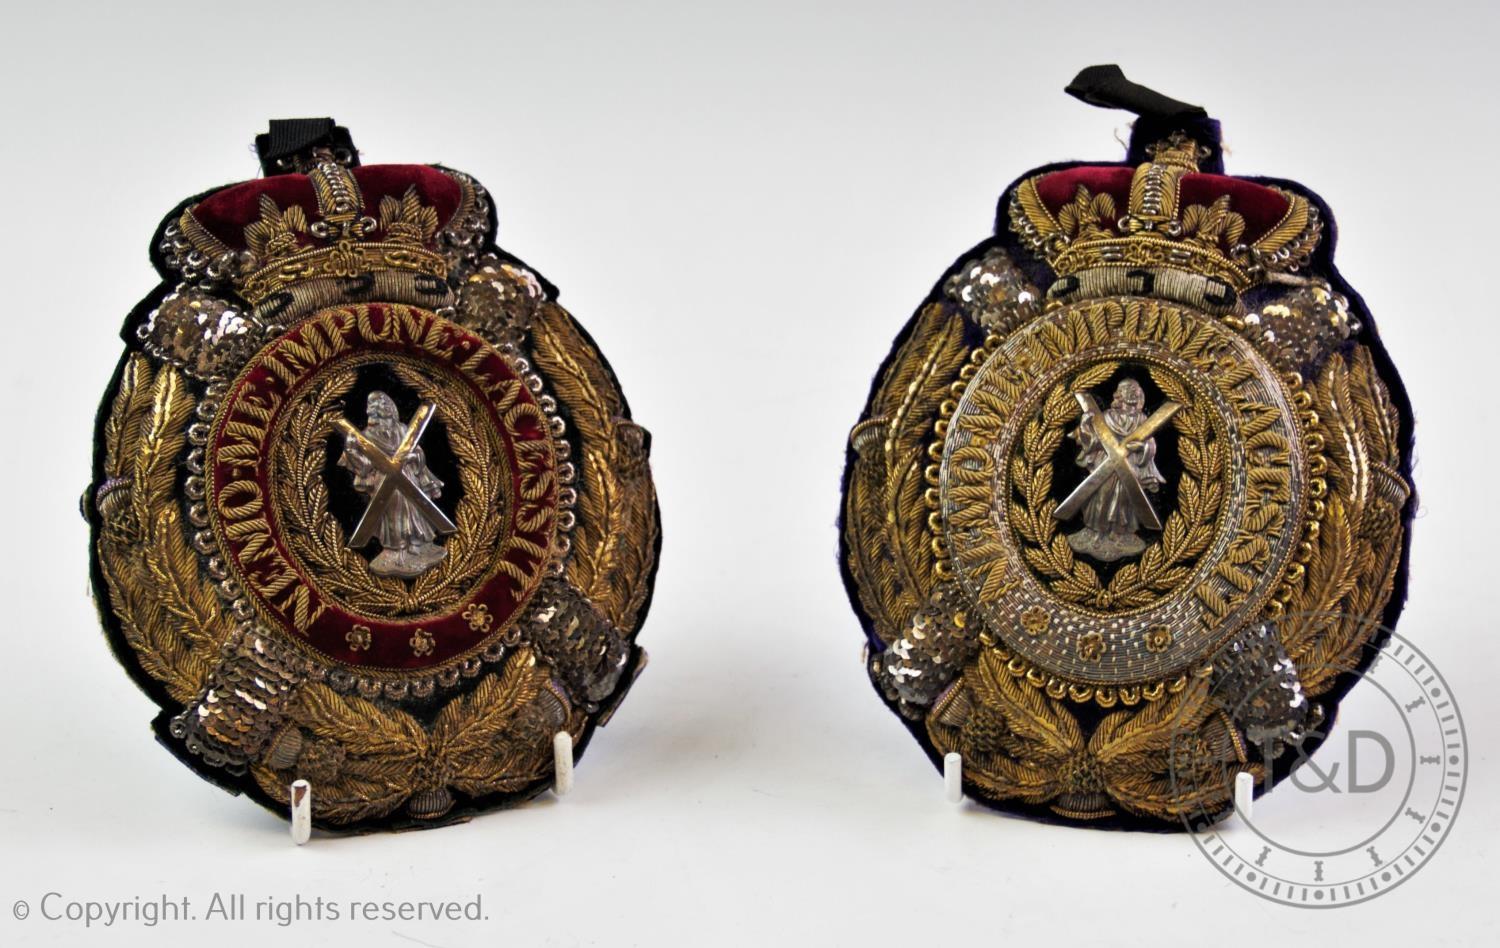 Two embroidered crests for The Black Watch (Royal Highland Regiment) of Canada, depicting St